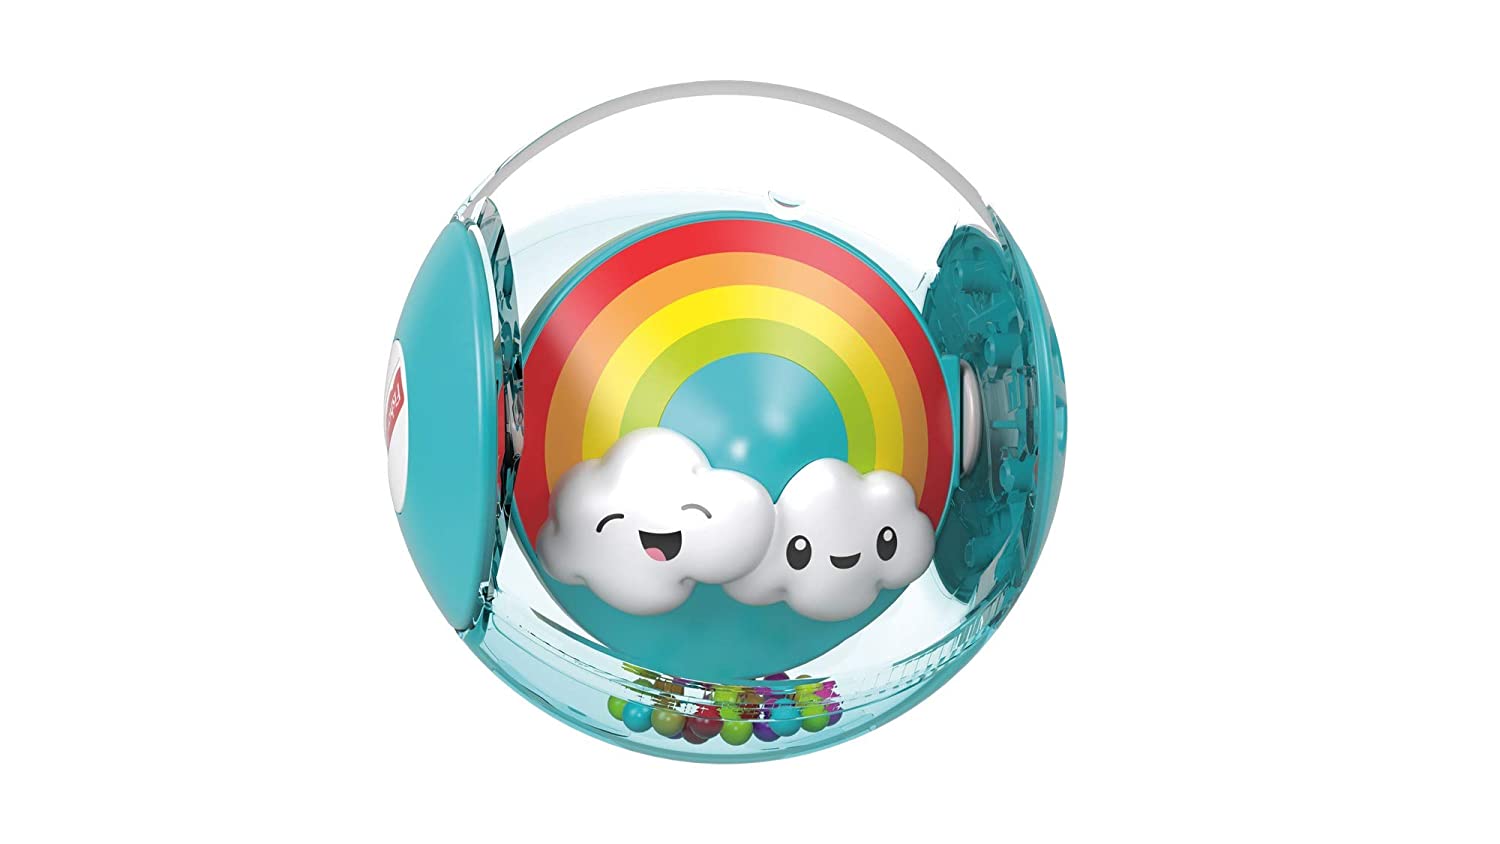 Fisher-Price GJF68 Rainbow Ball Baby Toy with 2 Playing Options, from 9 Months